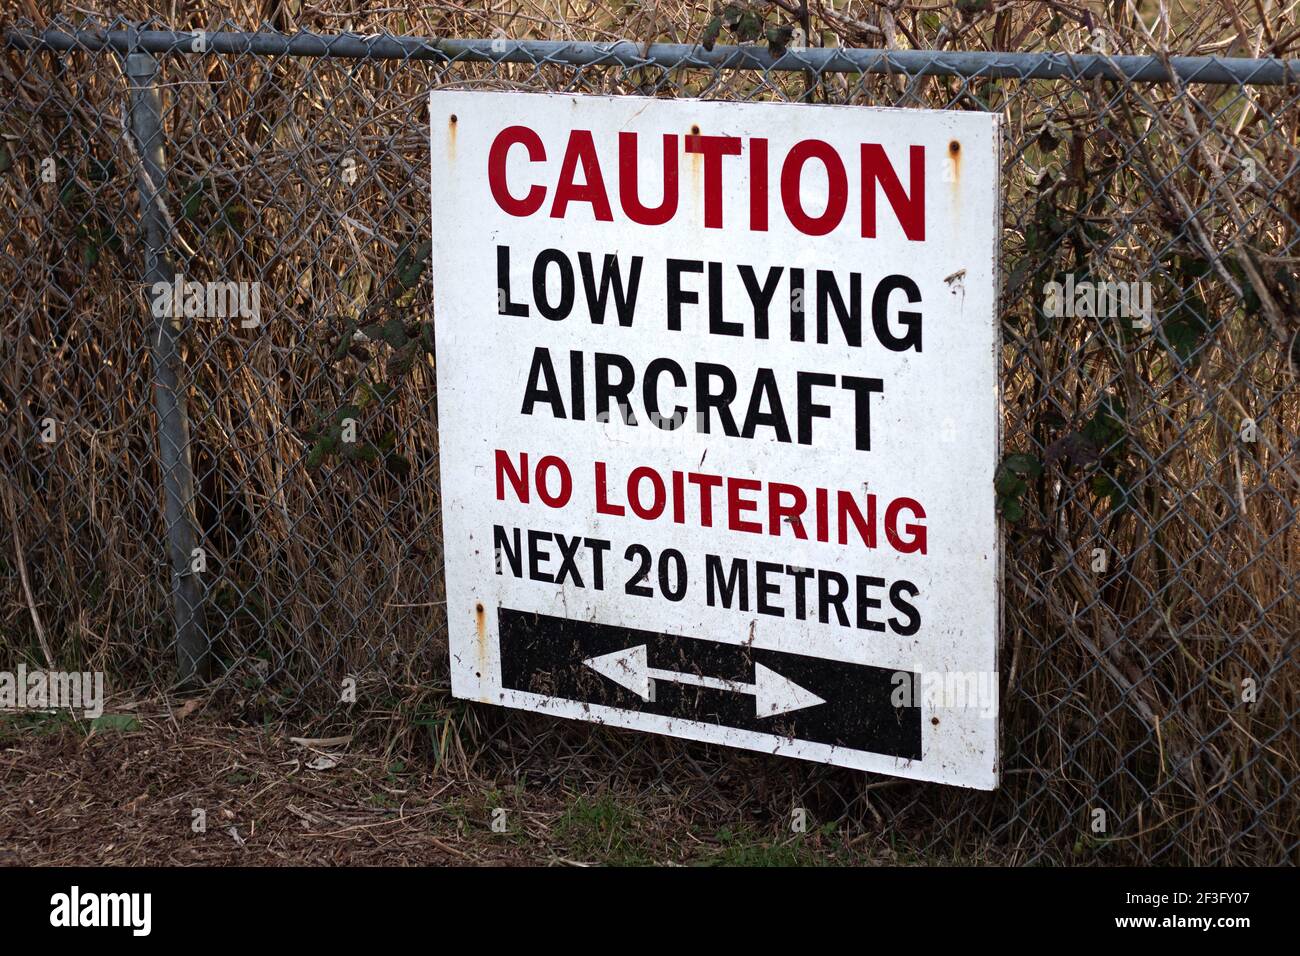 View of sign Caution Low Flying Aircraft, No Loitering Next 20 Metres at local airport in Courtenay, Canada Stock Photo